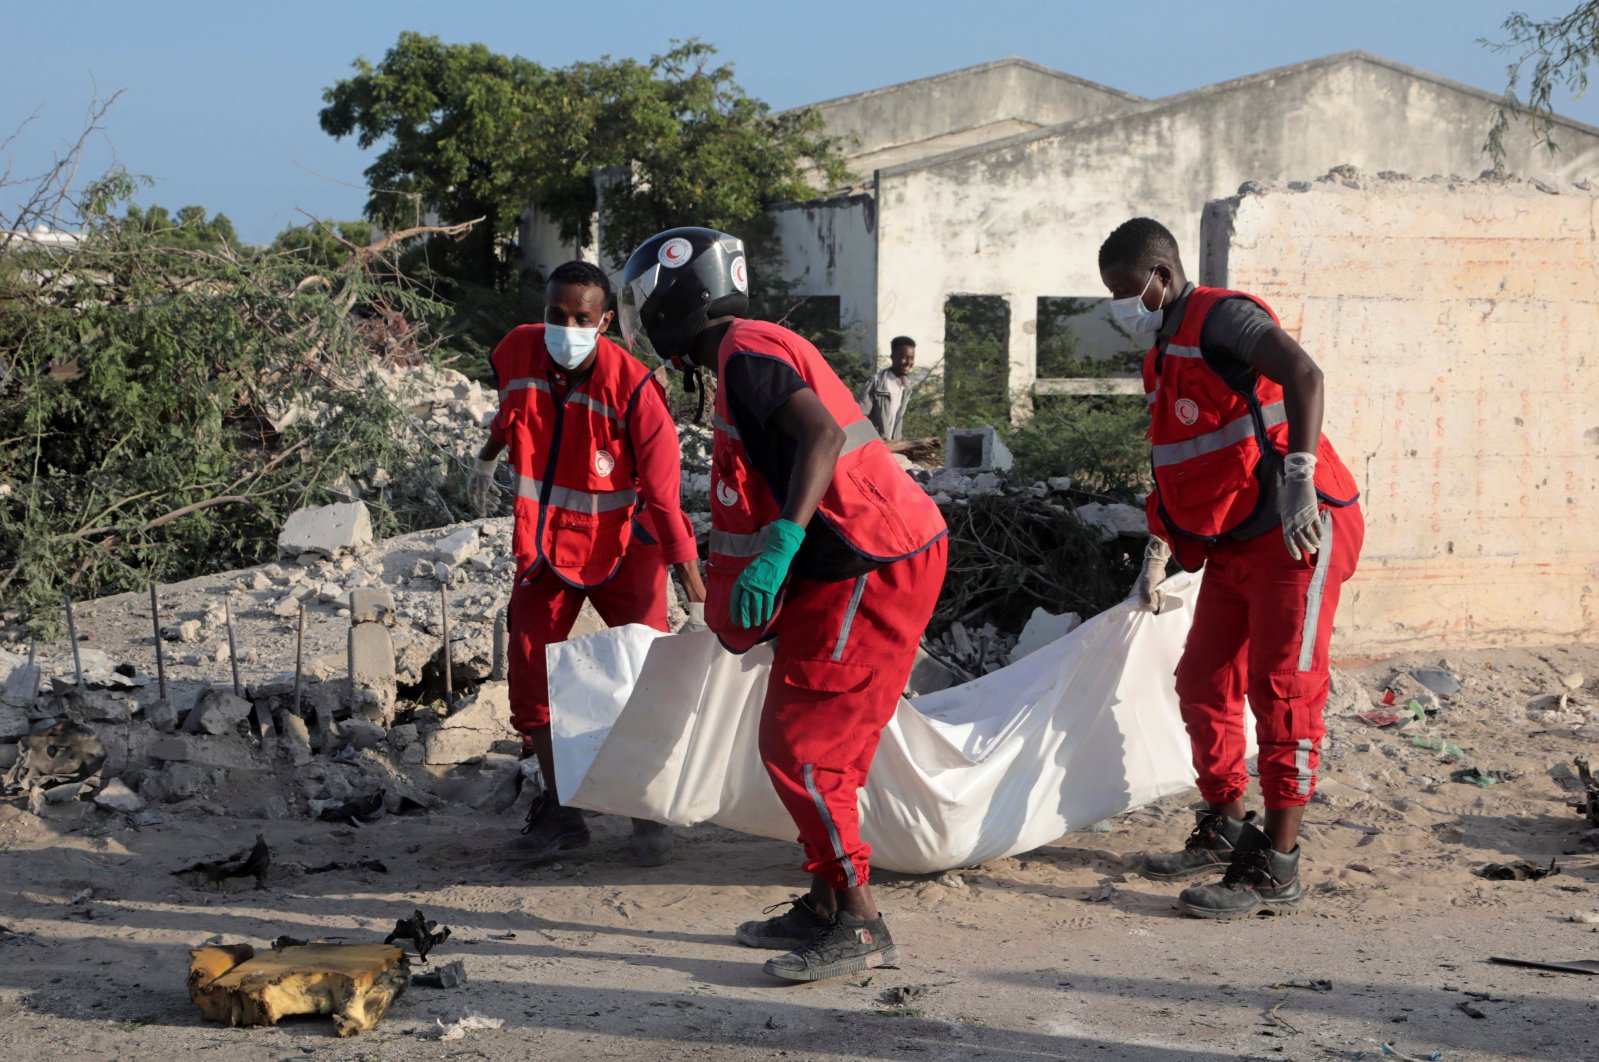 Red Crescent workers remove the body of a man killed at the scene of a suicide explosion targeting the African Union Mission in Somalia (AMISOM) convoy in Mogadishu, Somalia, Nov. 11, 2021. (Reuters Photo)